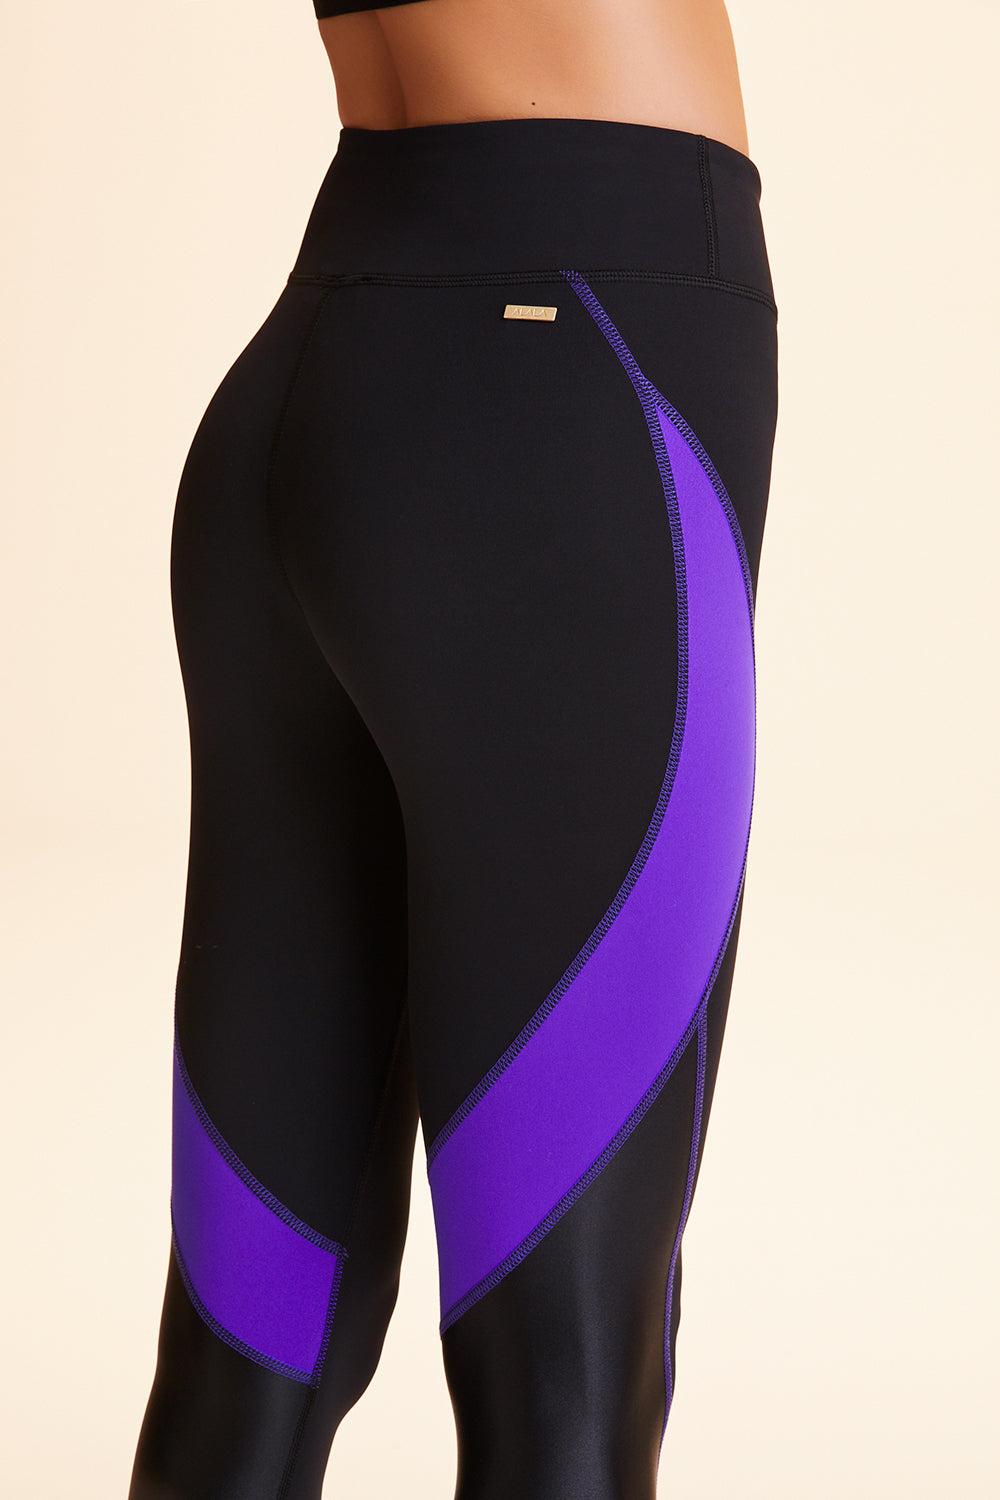 Close-up side view of Alala Women's Luxury Athleisure black and purple color-blocked tight